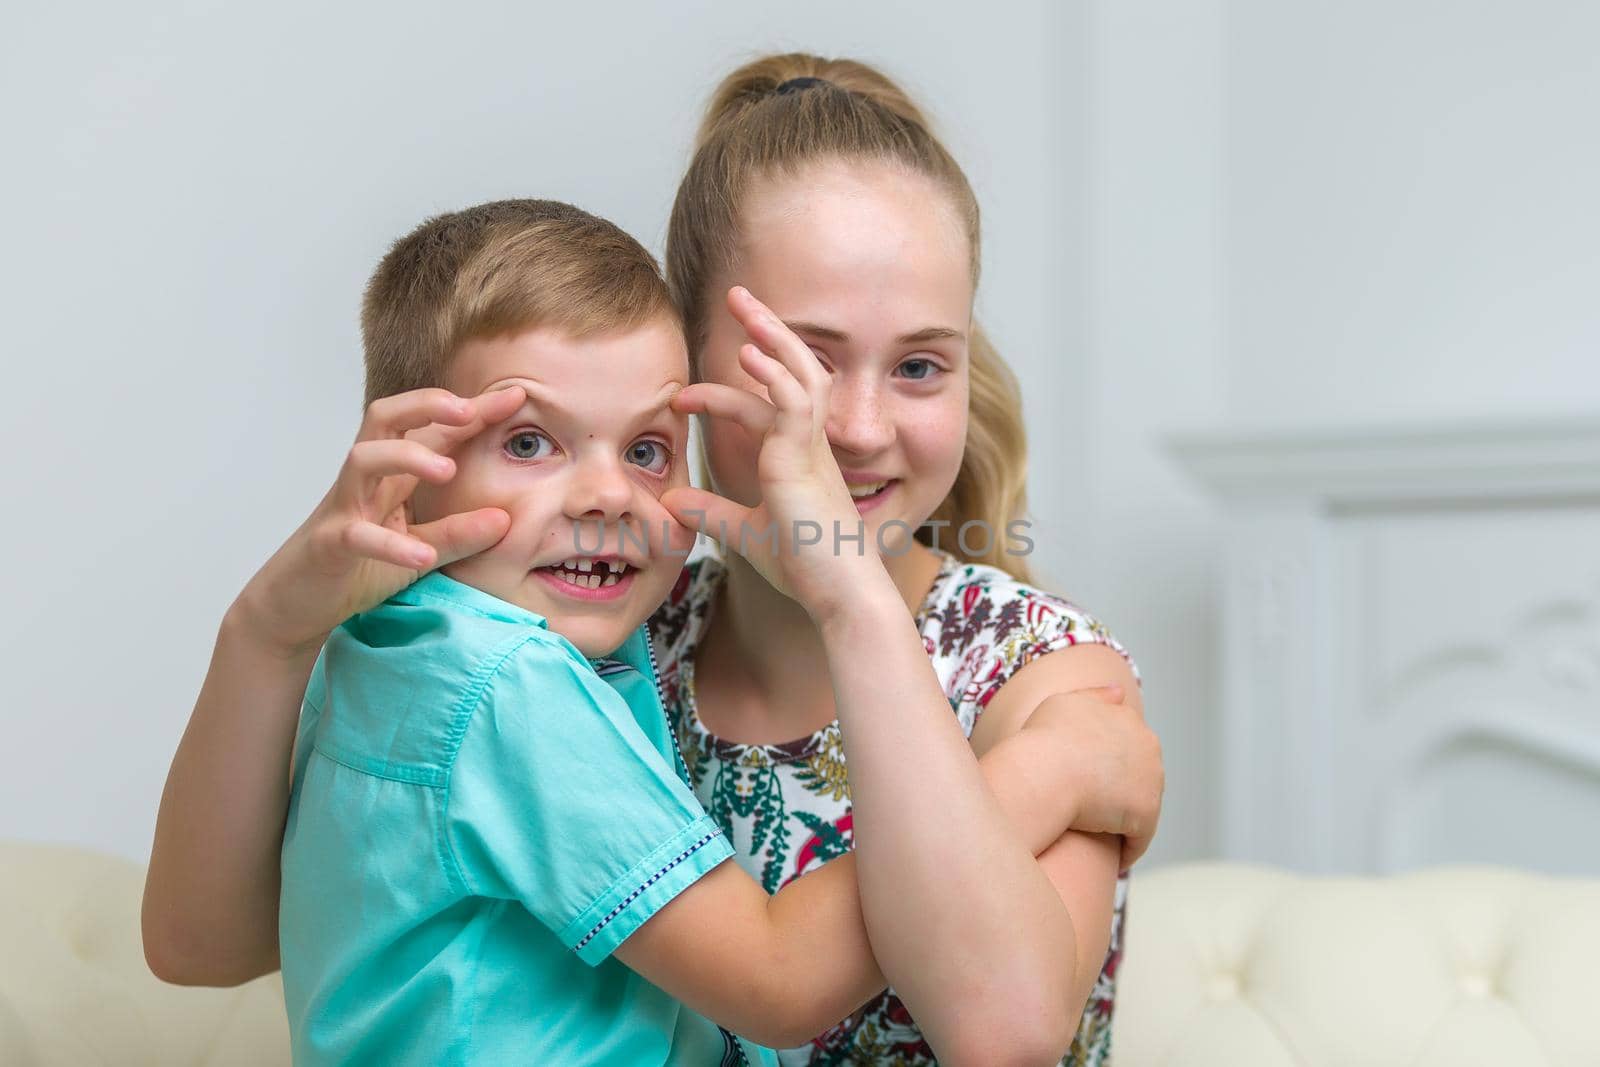 Brother and sister, boy and girl posing in the studio.